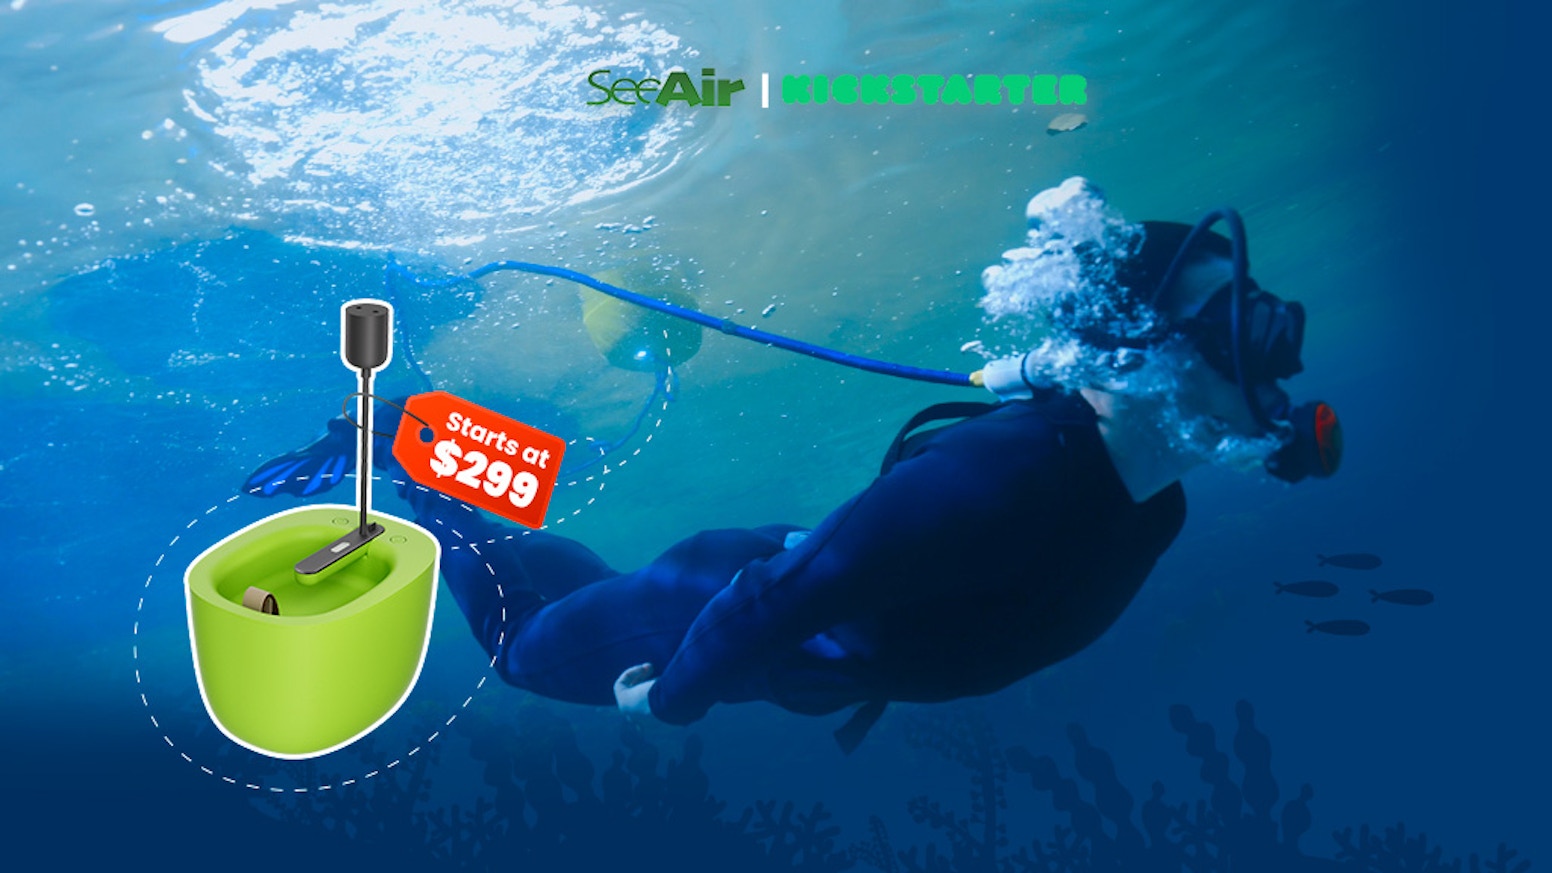 SeeAir: Tankless Dive System with Ultimate endurance